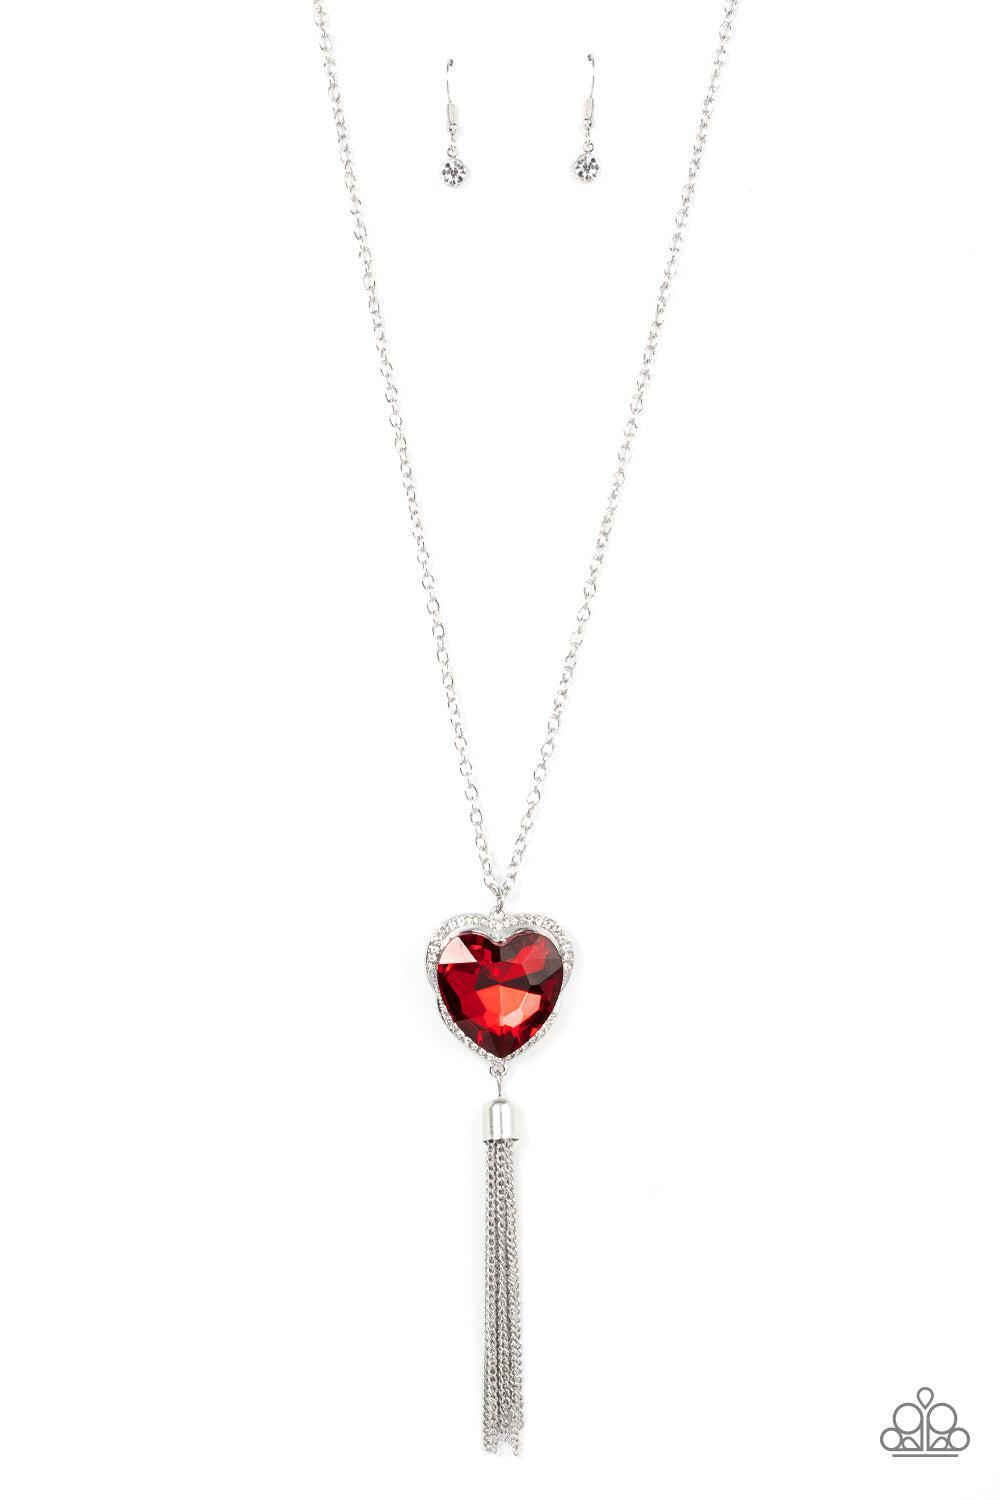 Finding My Forever Red Rhinestone Heart Necklace - Paparazzi Accessories- lightbox - CarasShop.com - $5 Jewelry by Cara Jewels